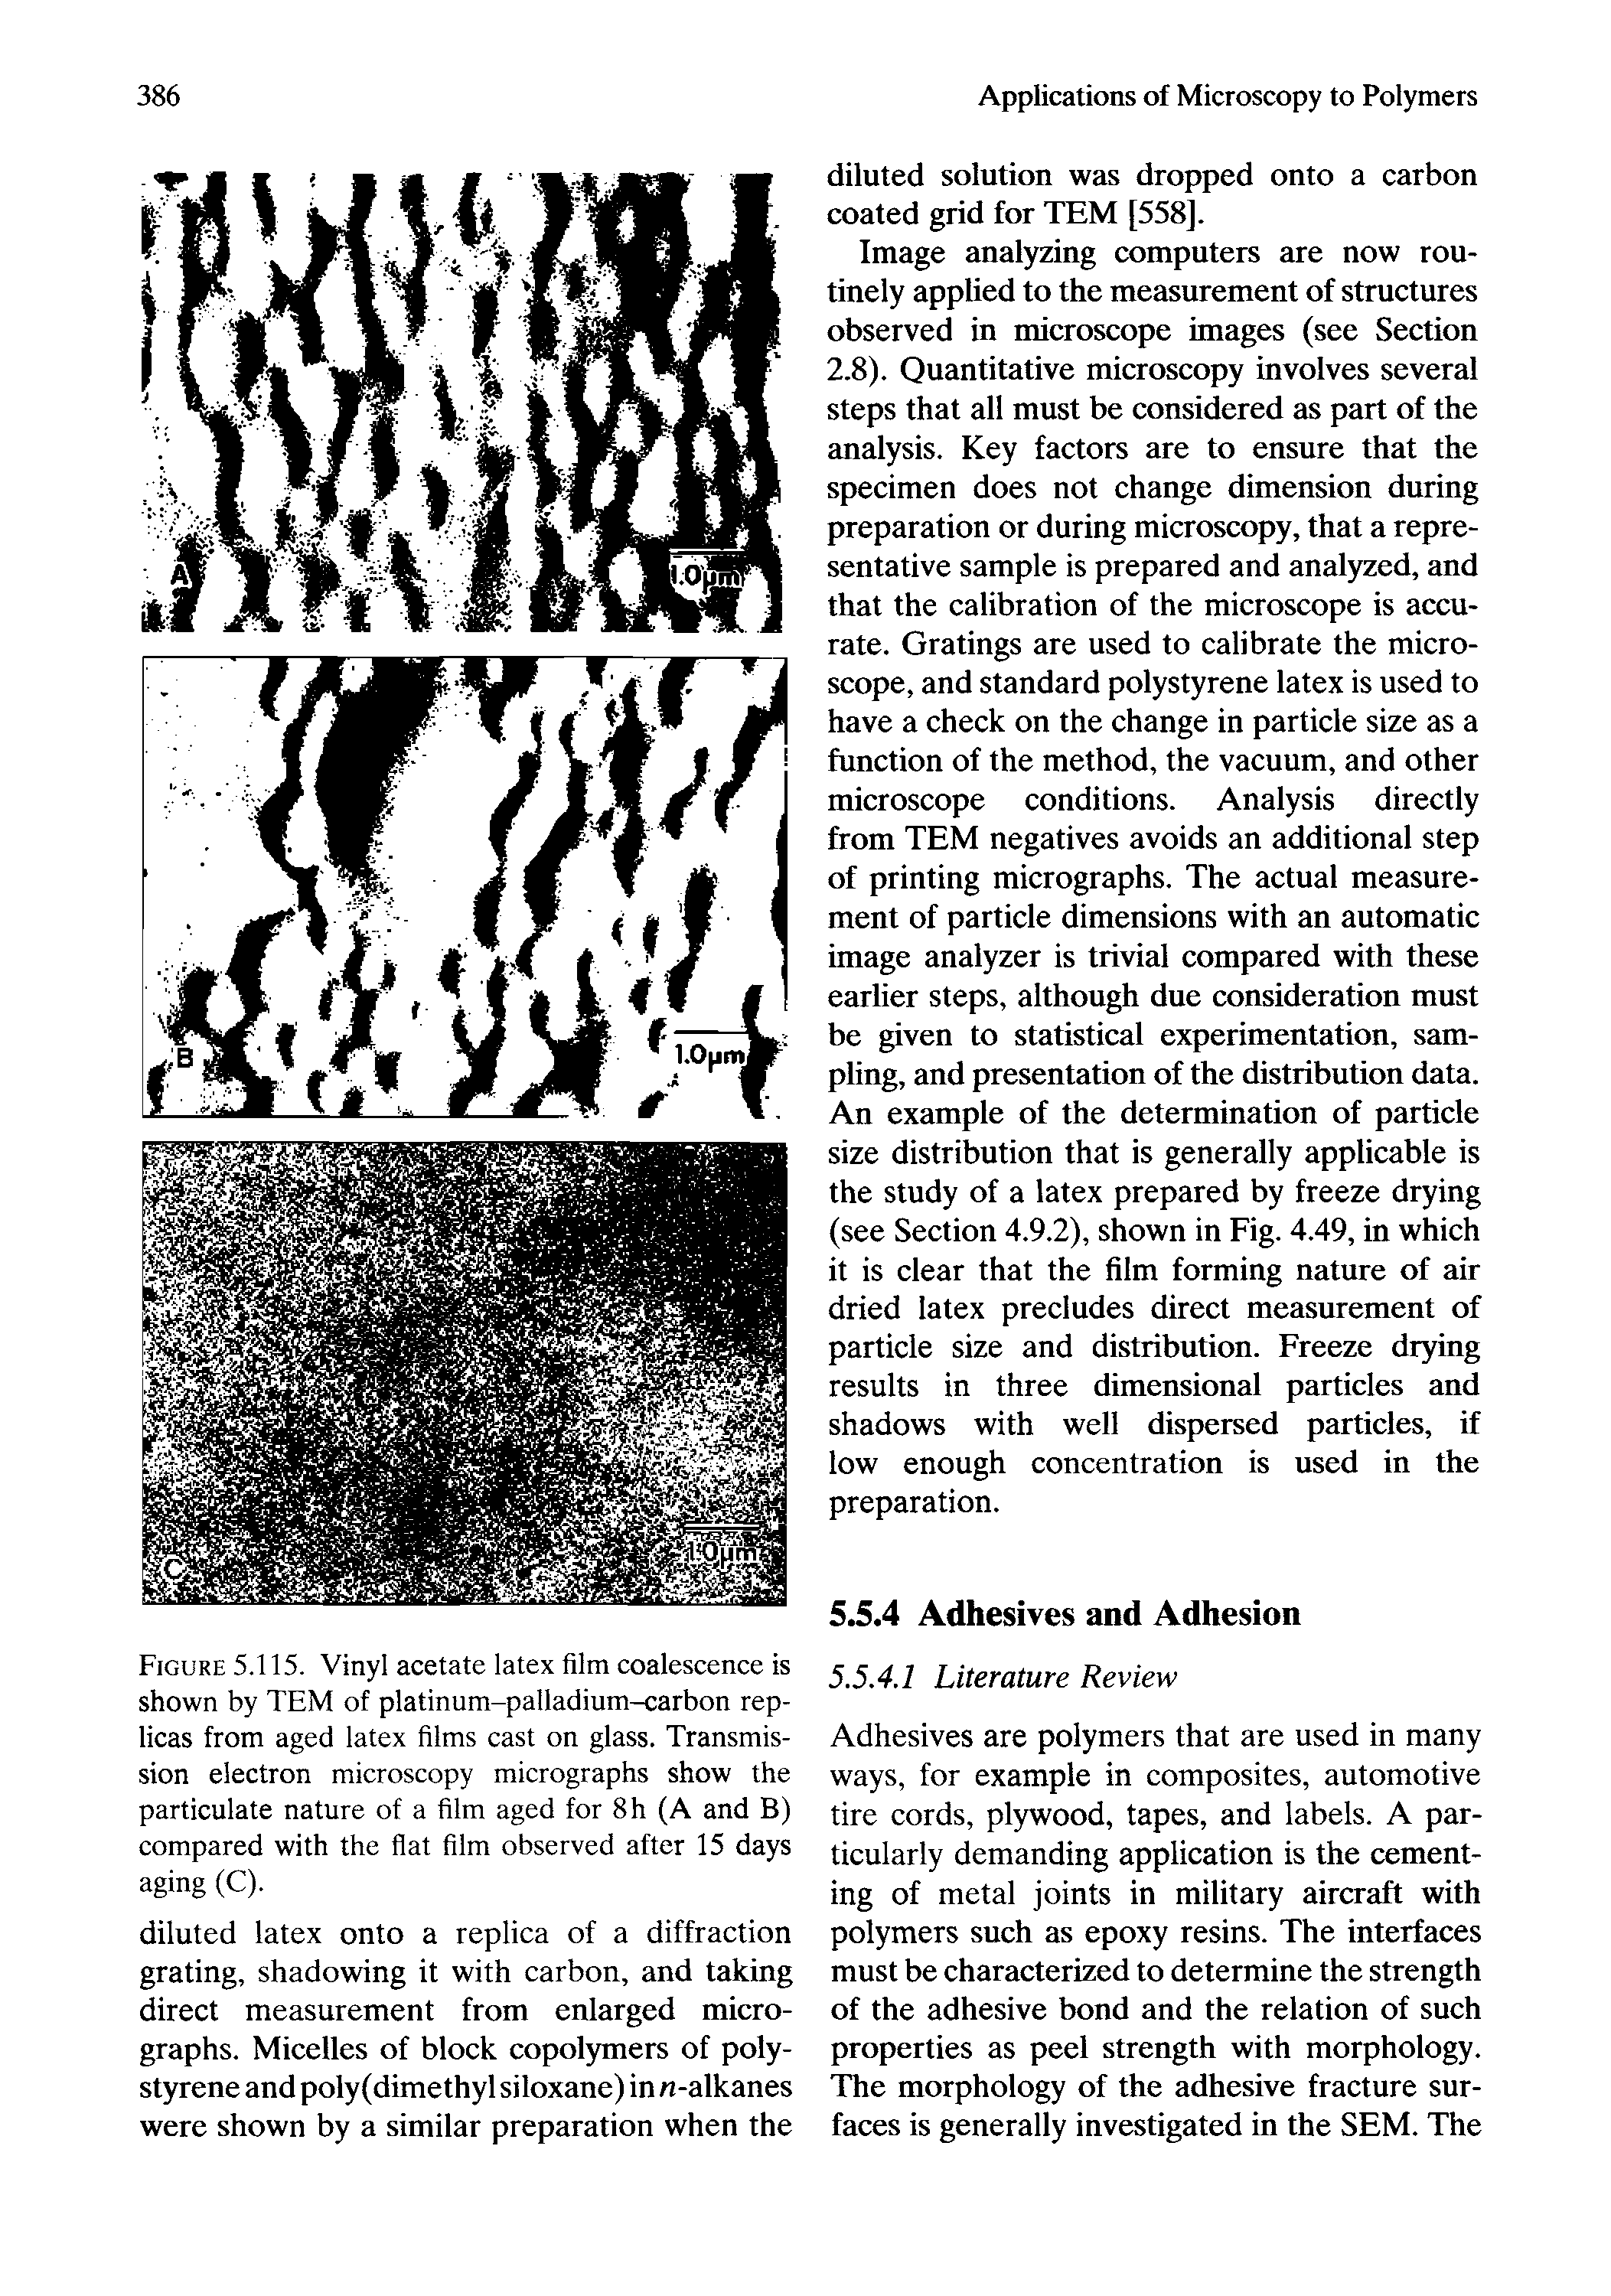 Figure 5.115. Vinyl acetate latex film coalescence is shown by TEM of platinum-palladium-carbon replicas from aged latex films cast on glass. Transmission electron microscopy micrographs show the particulate nature of a film aged for 8h (A and B) compared with the flat film observed after 15 days aging (C).